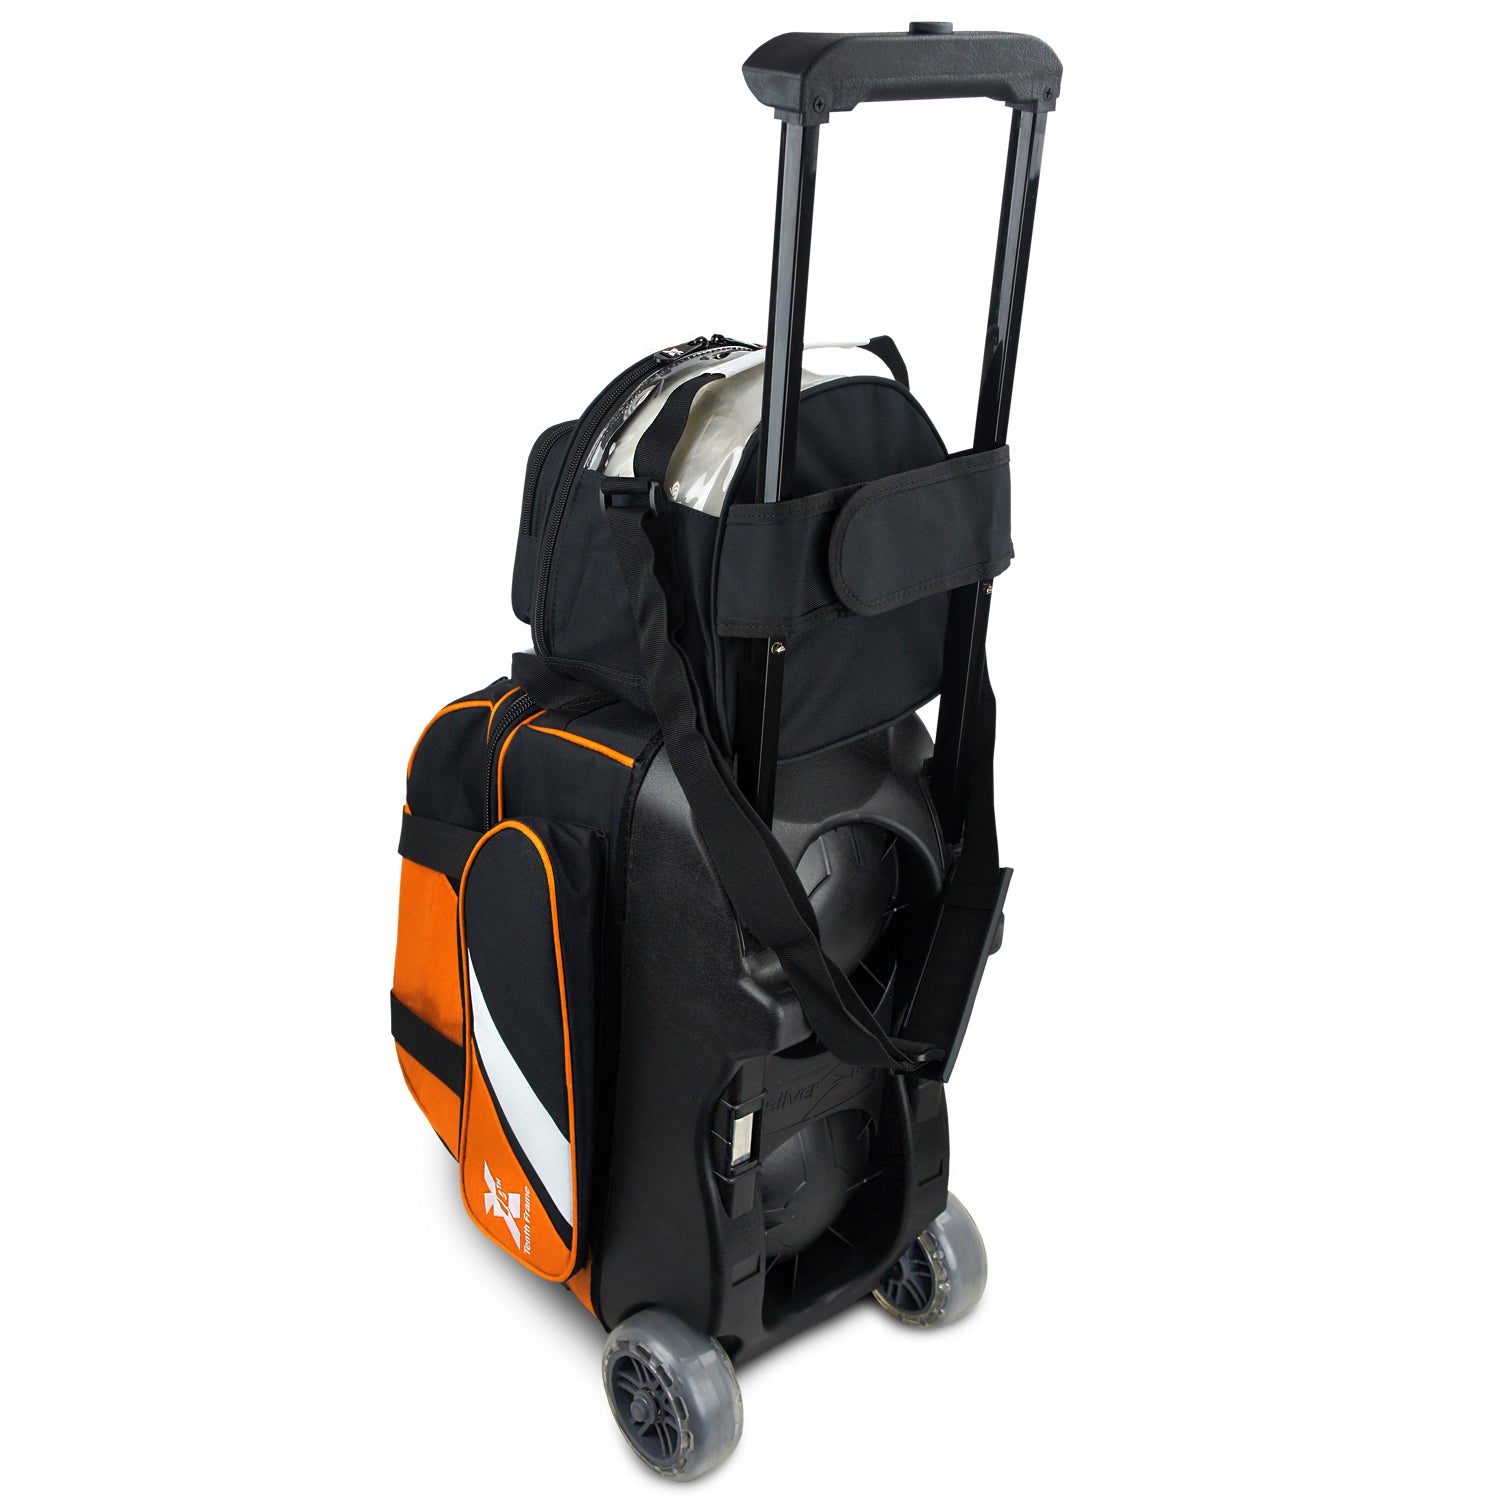 Tenth Frame Deluxe Double Bundle - 2 Ball Roller with a 1 Ball Add-On Bowling Bag (Orange - Back)